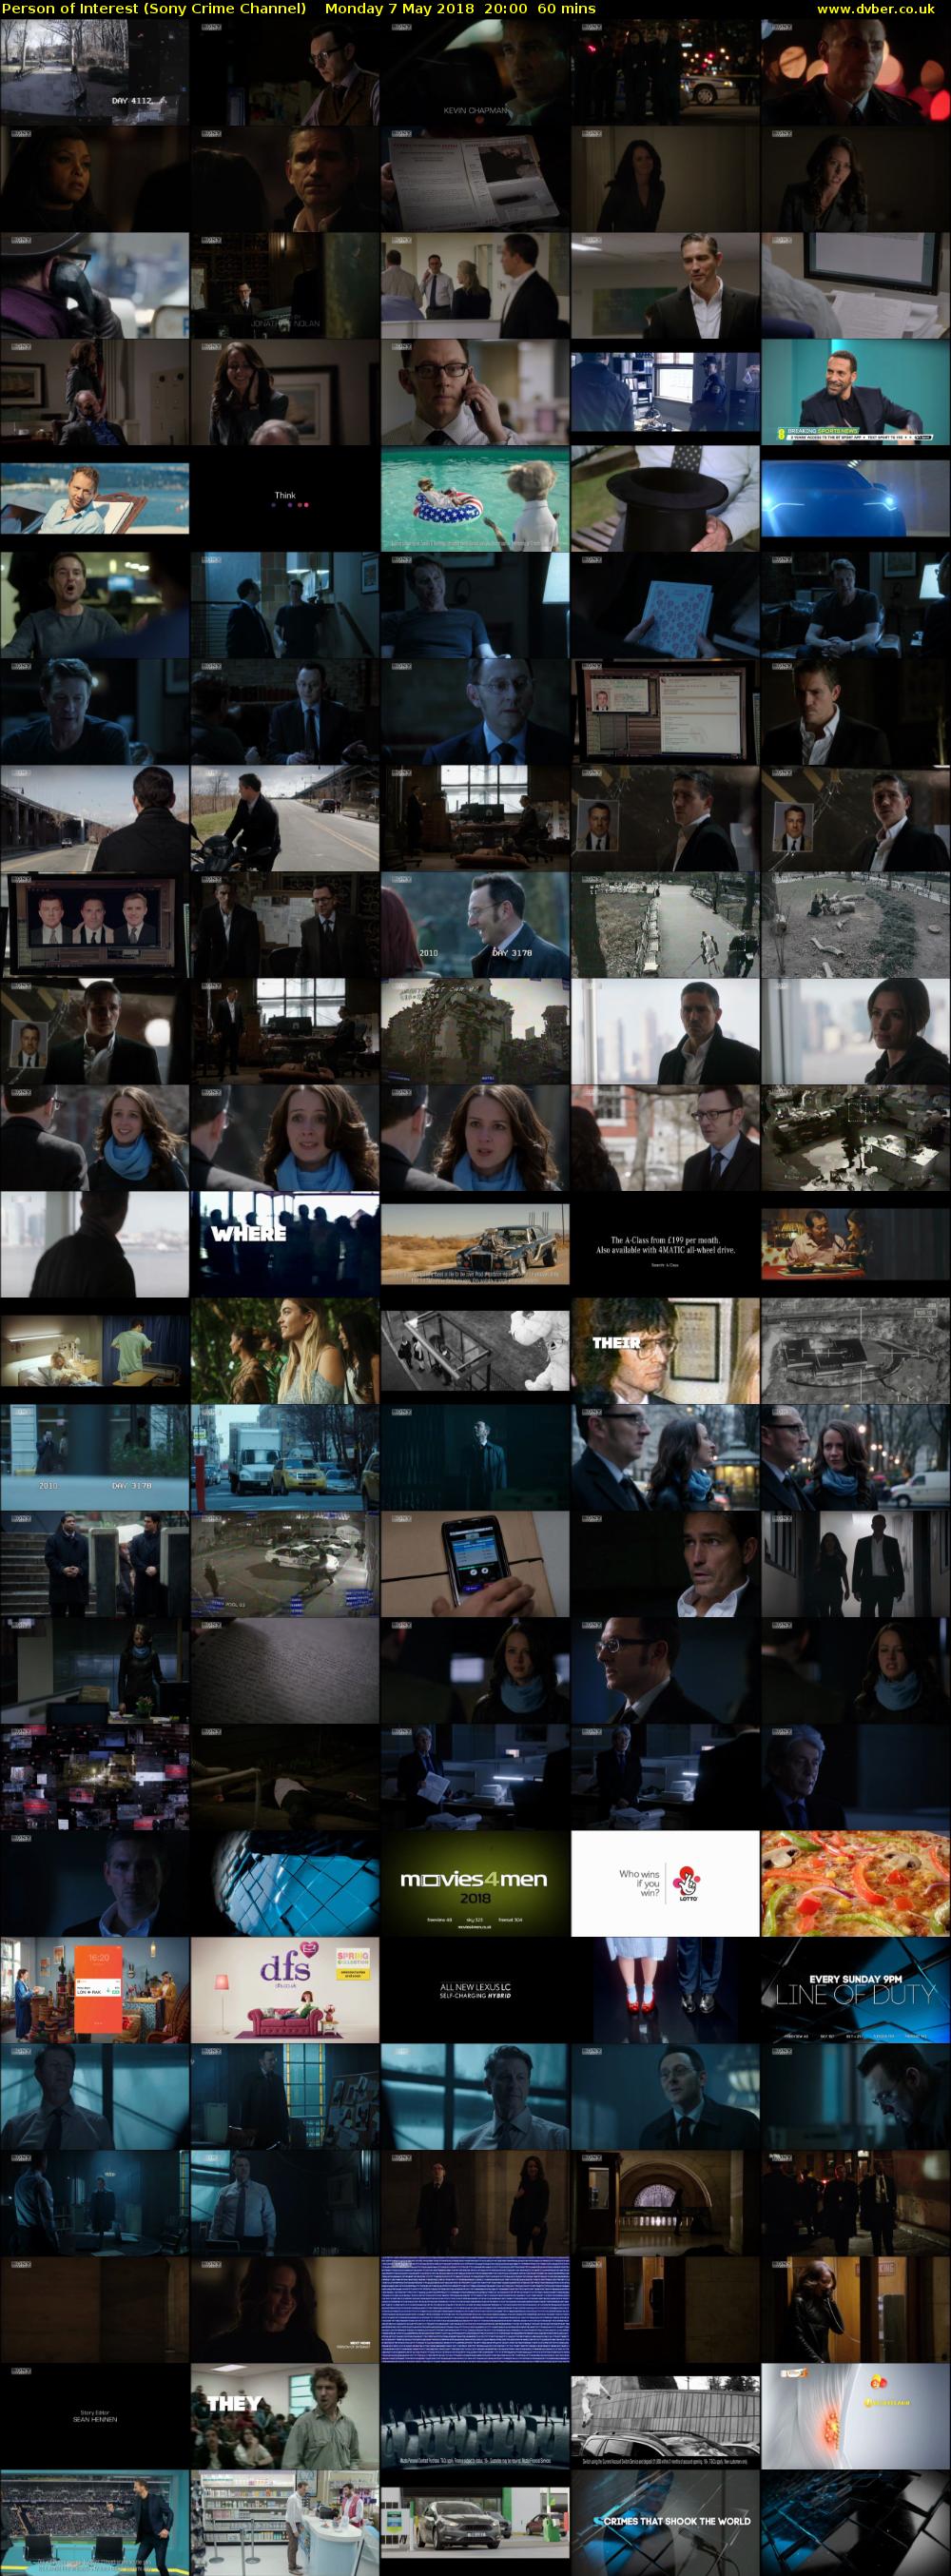 Person of Interest (Sony Crime Channel) Monday 7 May 2018 20:00 - 21:00